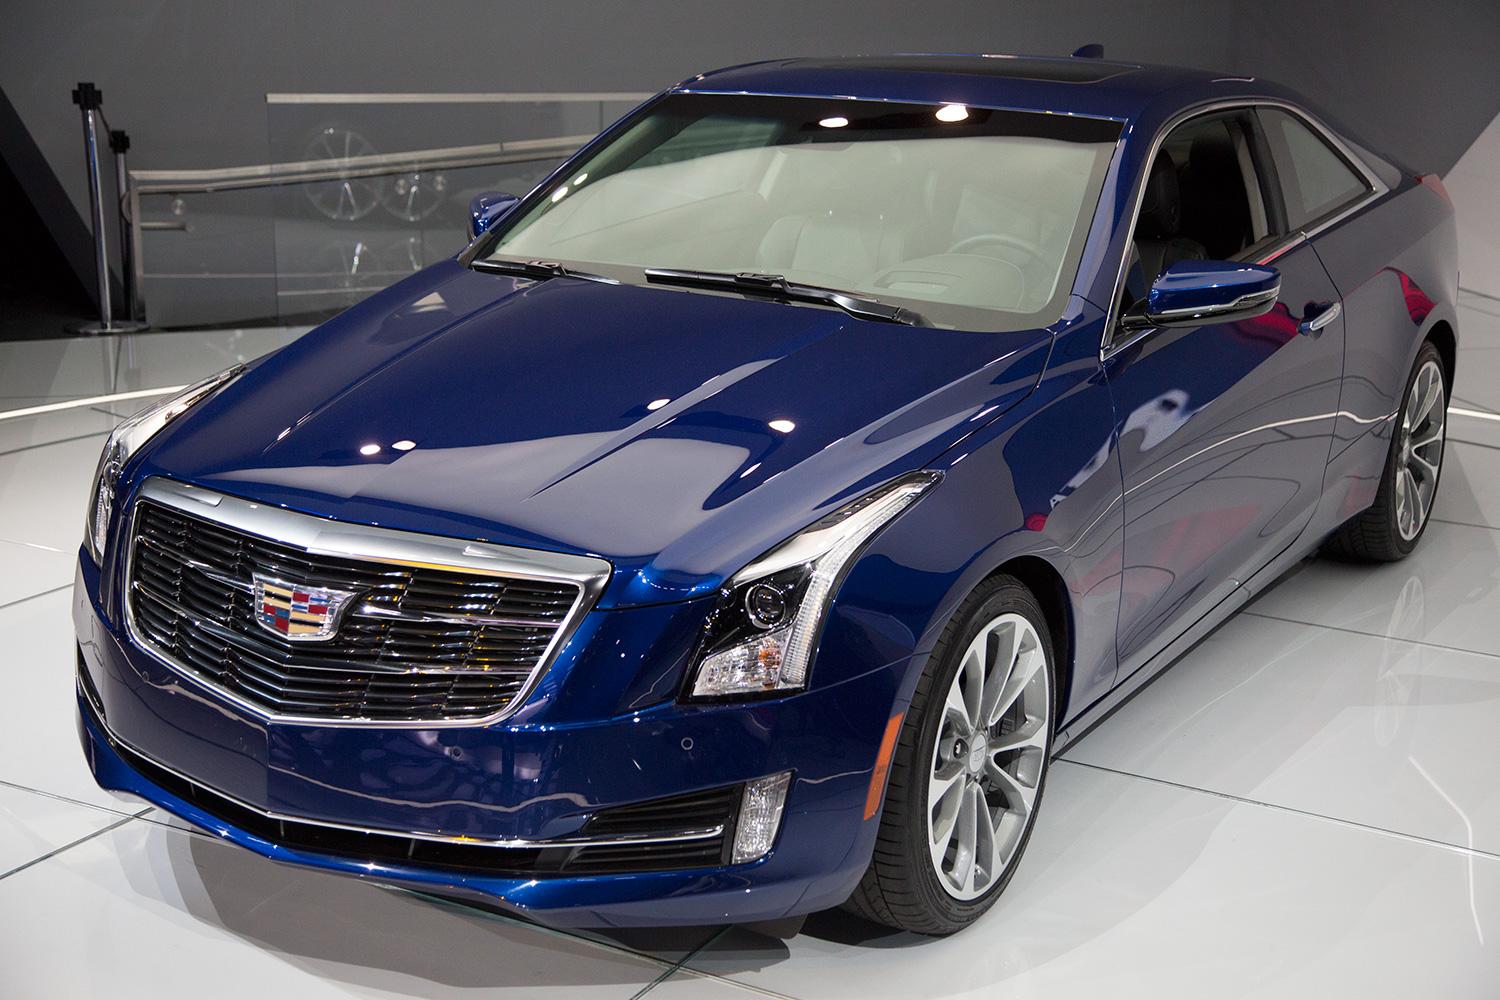 2015 Cadillac ATS Coupe front left